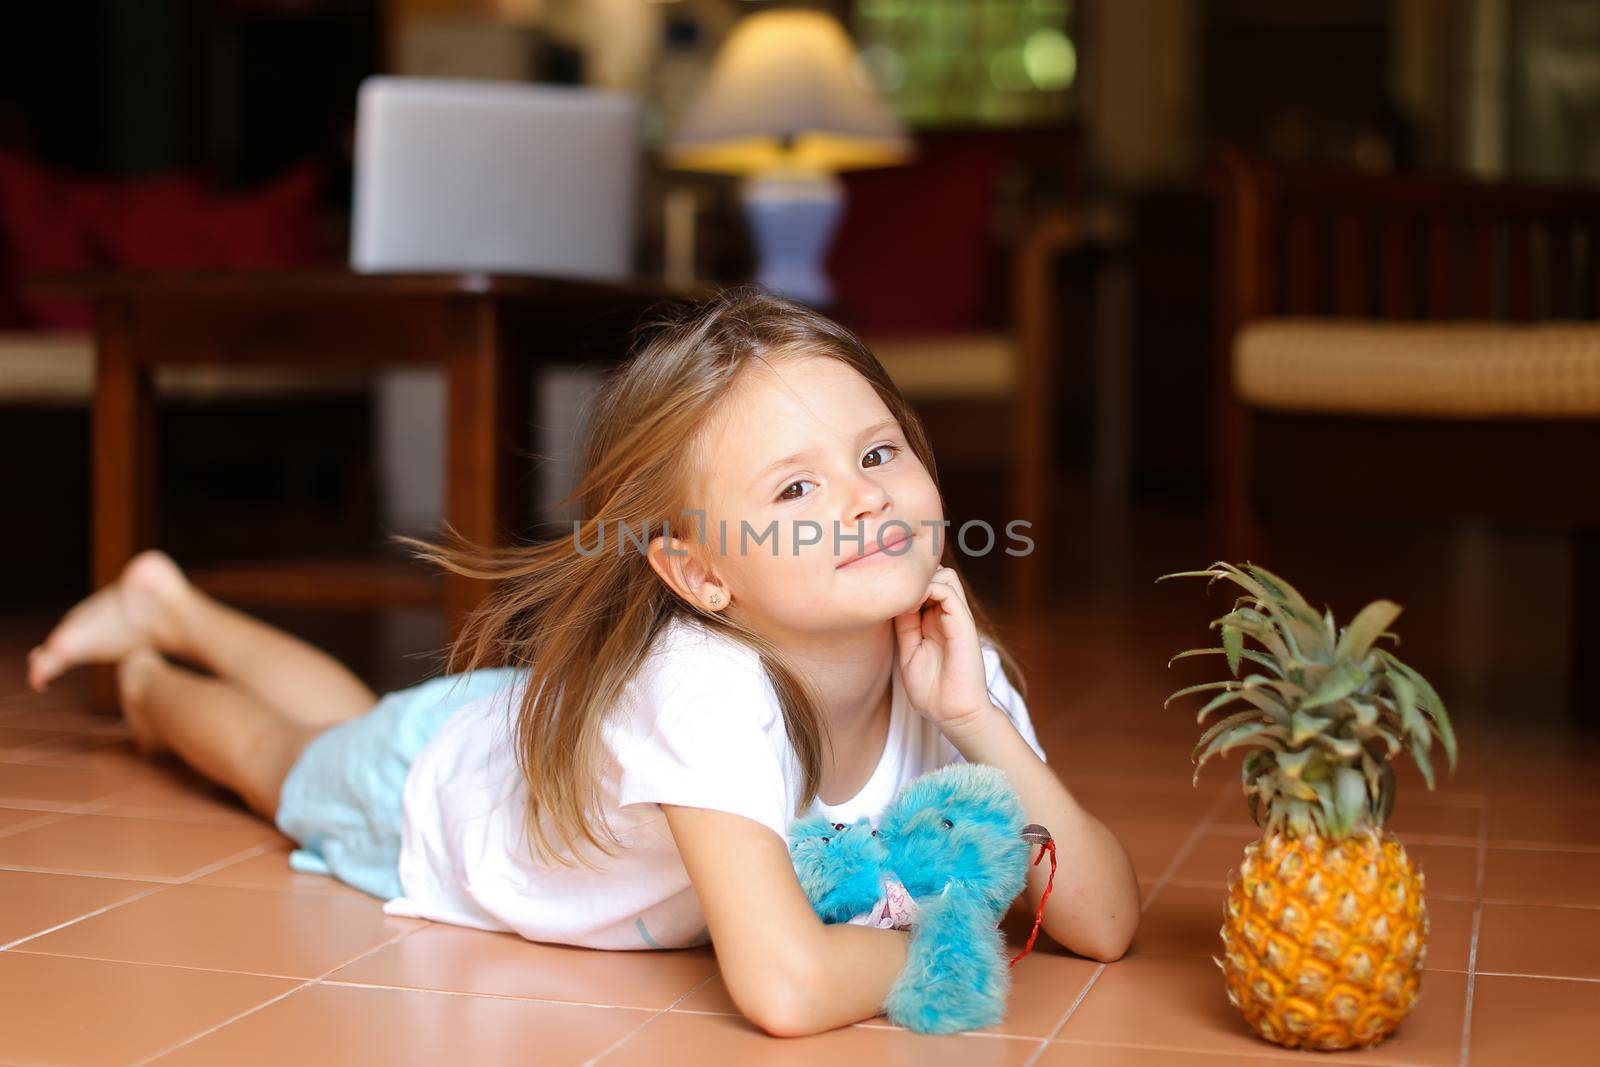 Little barefoot cute girl lying on floor and playing with pineapple and toy, laptop in background. Concept of health vegeterian life and childhood.